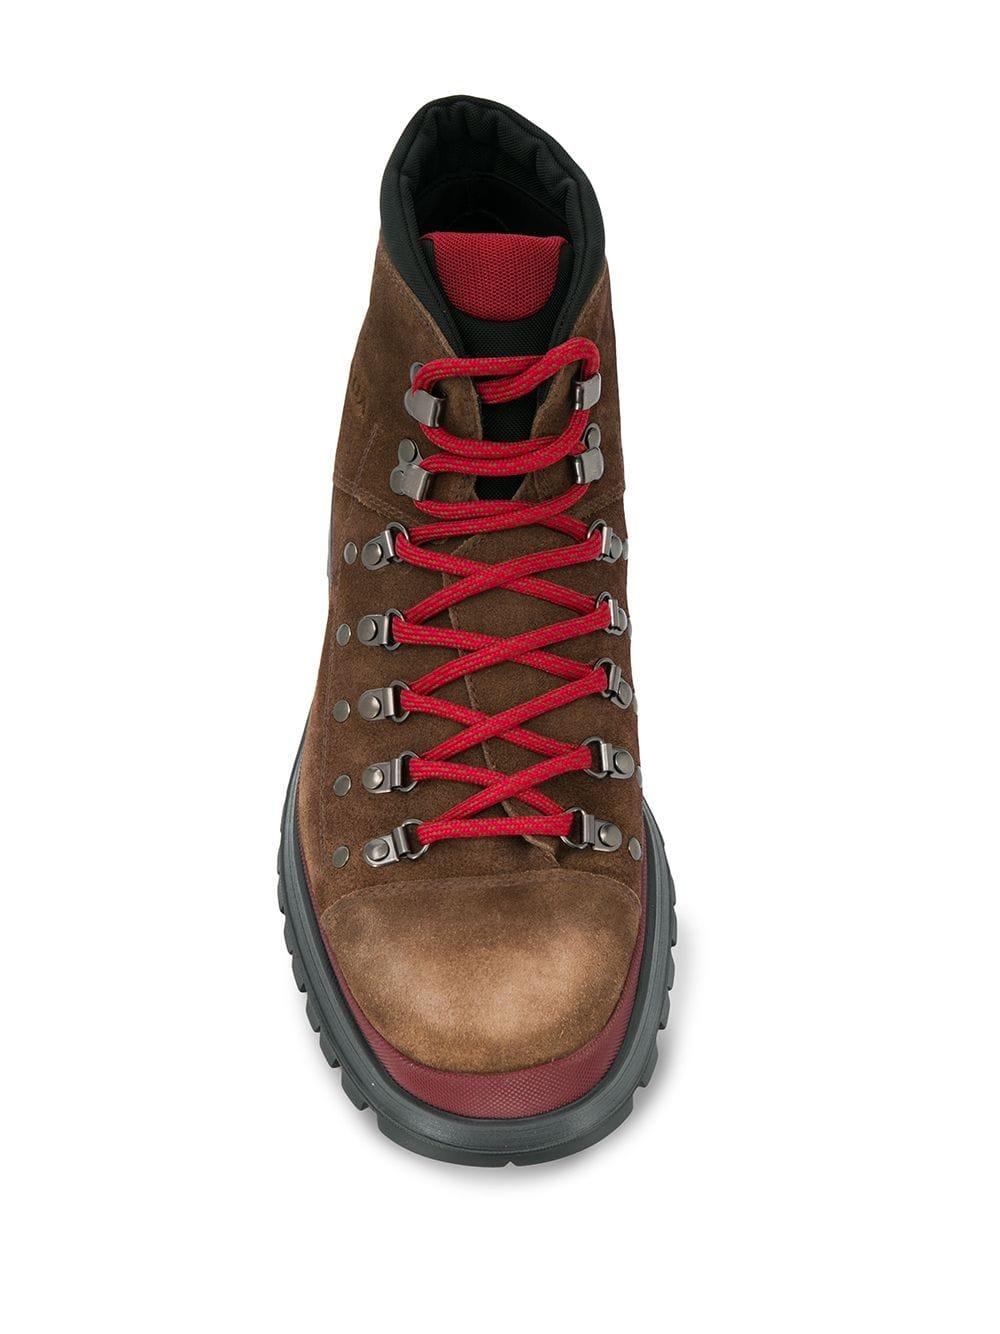 Prada Leather Lace-up Hiking Boots in Brown for Men - Lyst